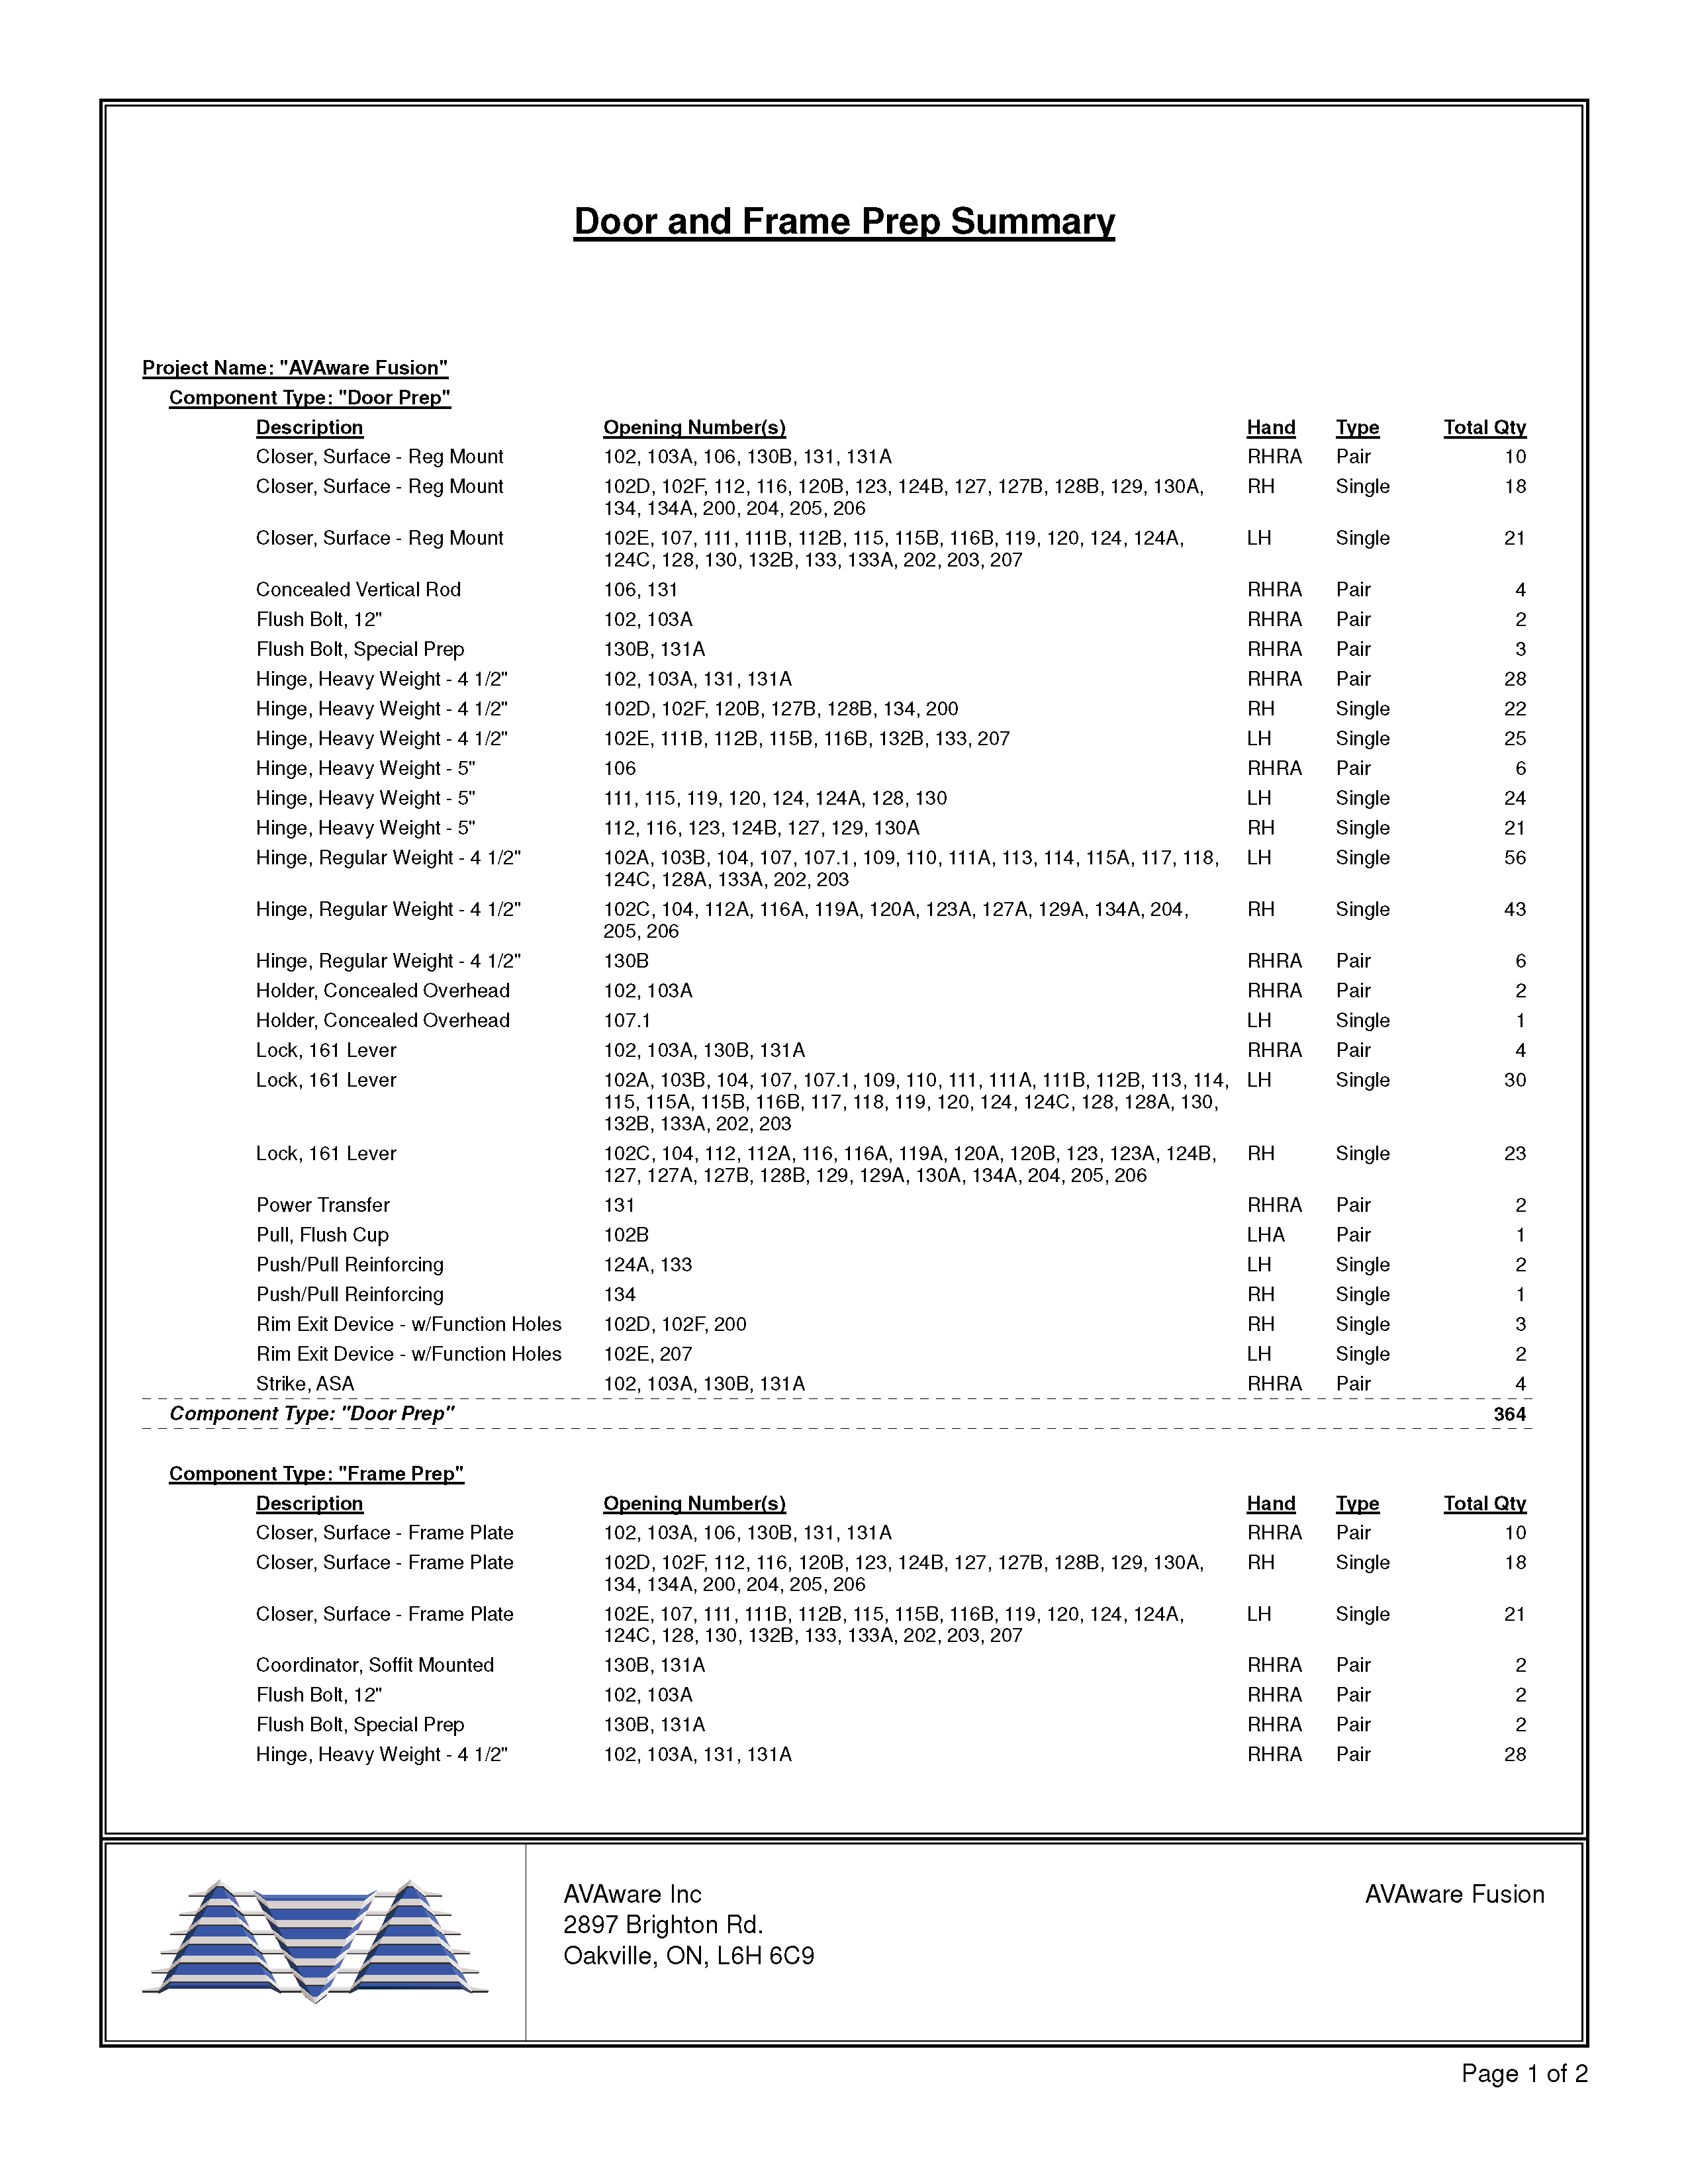 Door and Frame Prep Summary Page 1